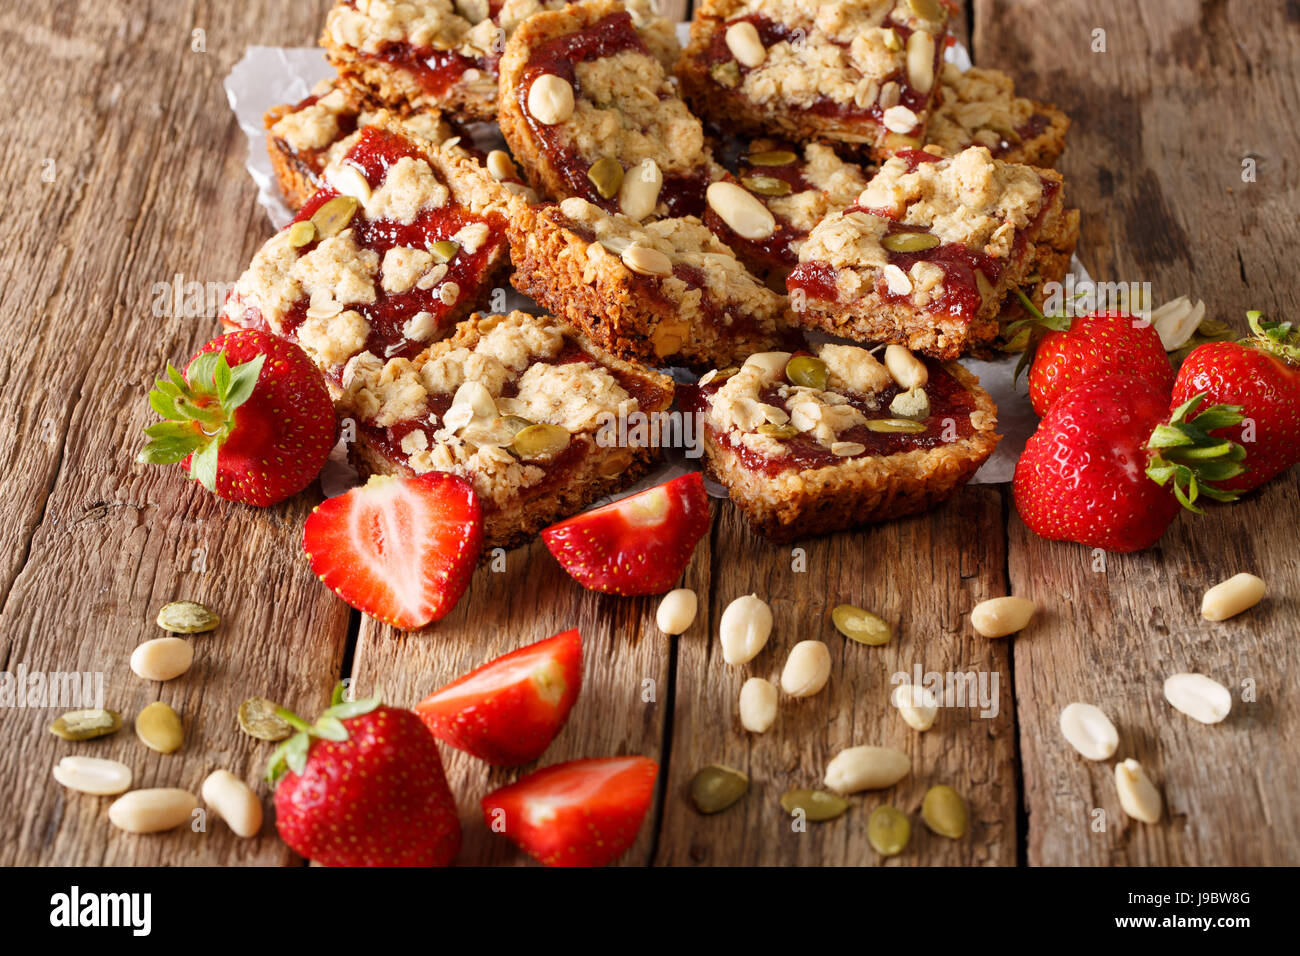 Healthy Oat bars with strawberry jam, seeds and nuts close-up on the table. horizontal Stock Photo